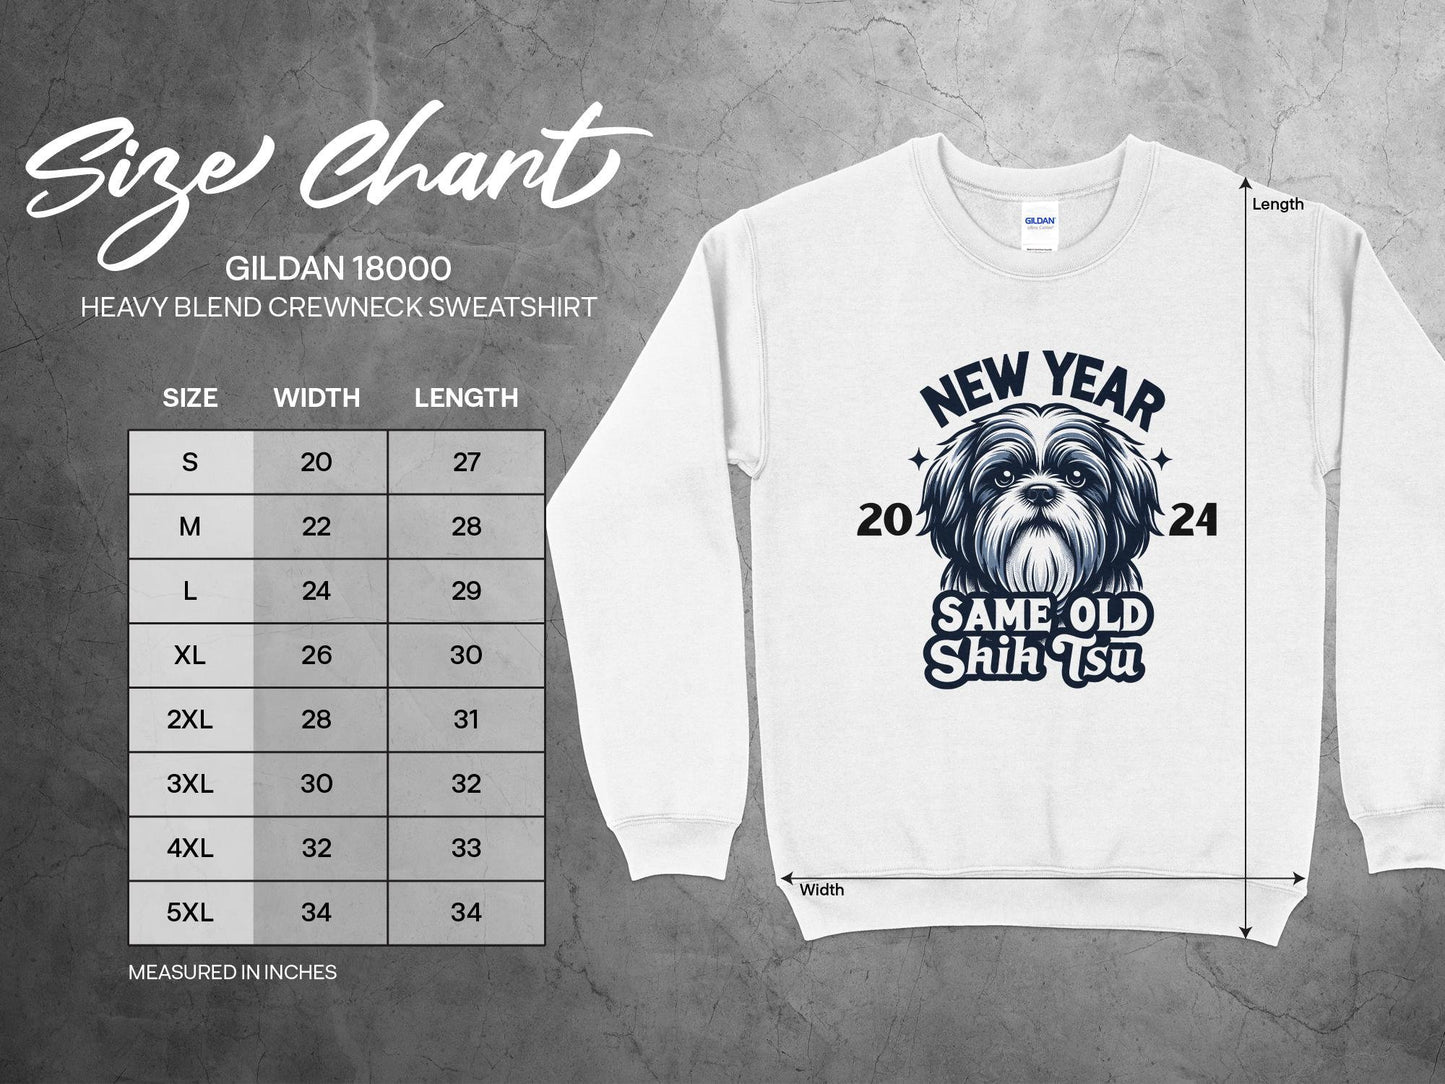 New Year, Same Old Shih Tzu - Funny Dog Lover Shirt, fun new years shirt, 2024 shirt, new years eve outfit, women's graphic tee